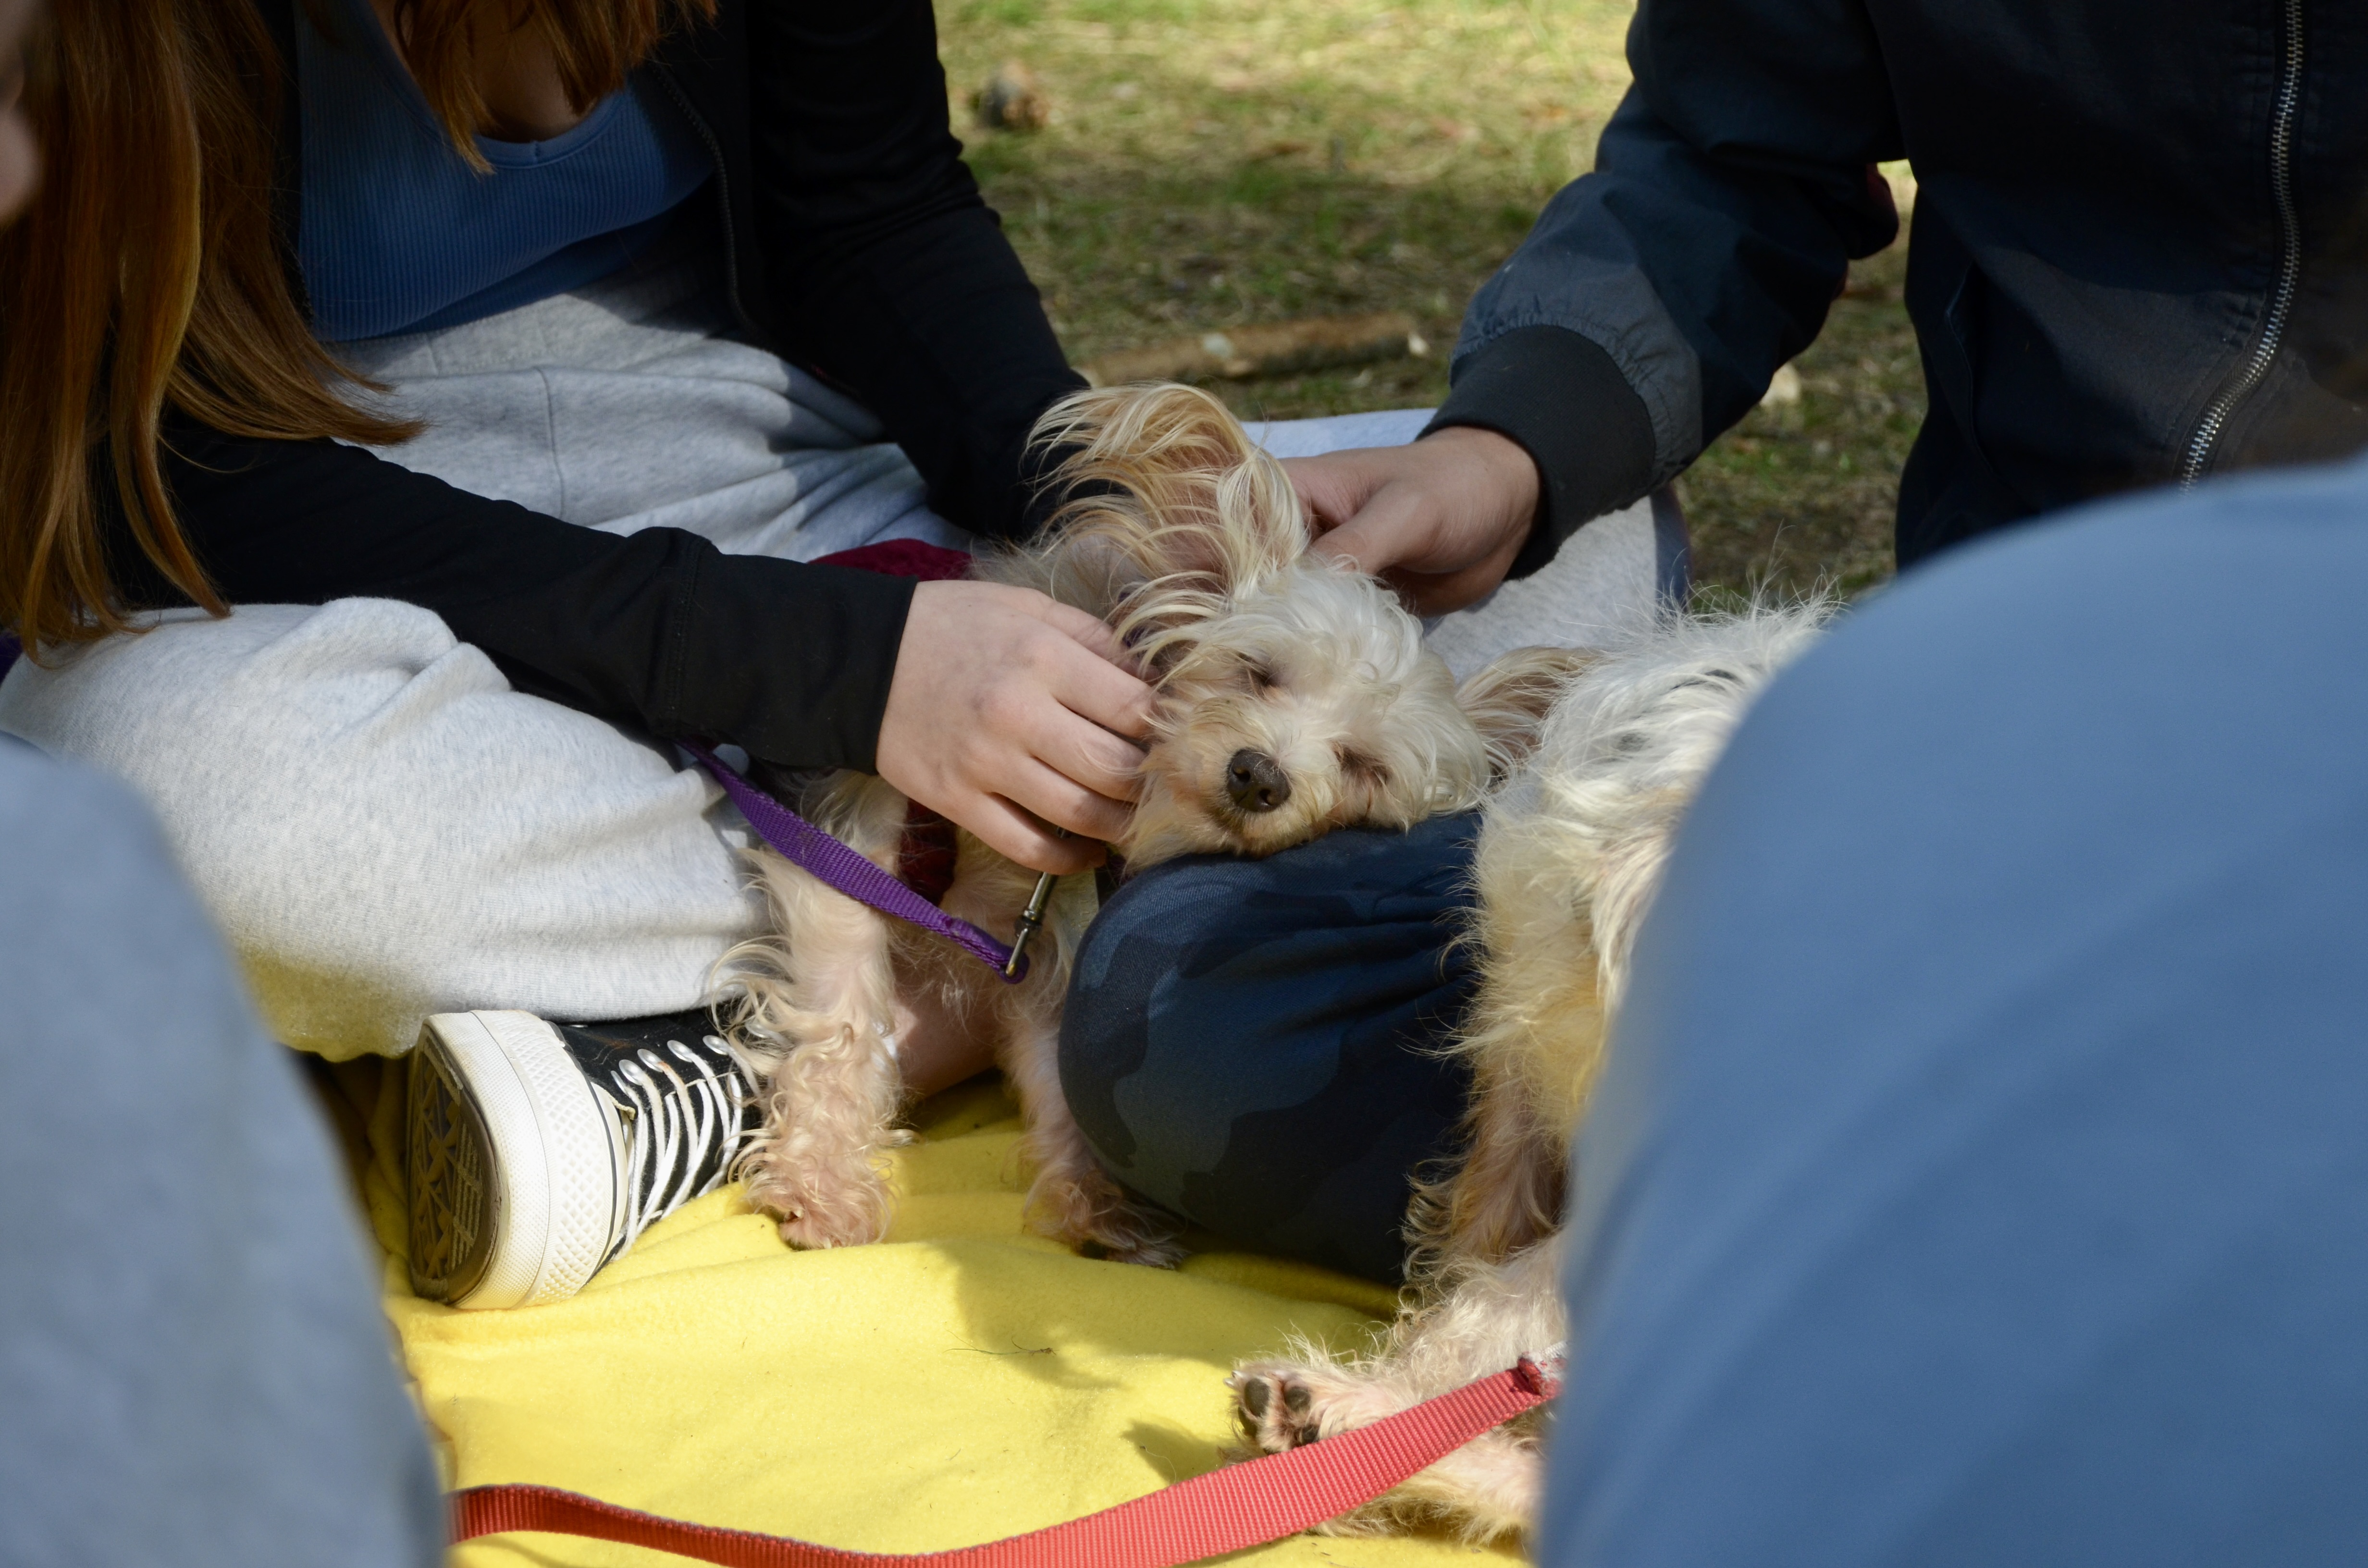 Puppy pet students at a pet therapy event